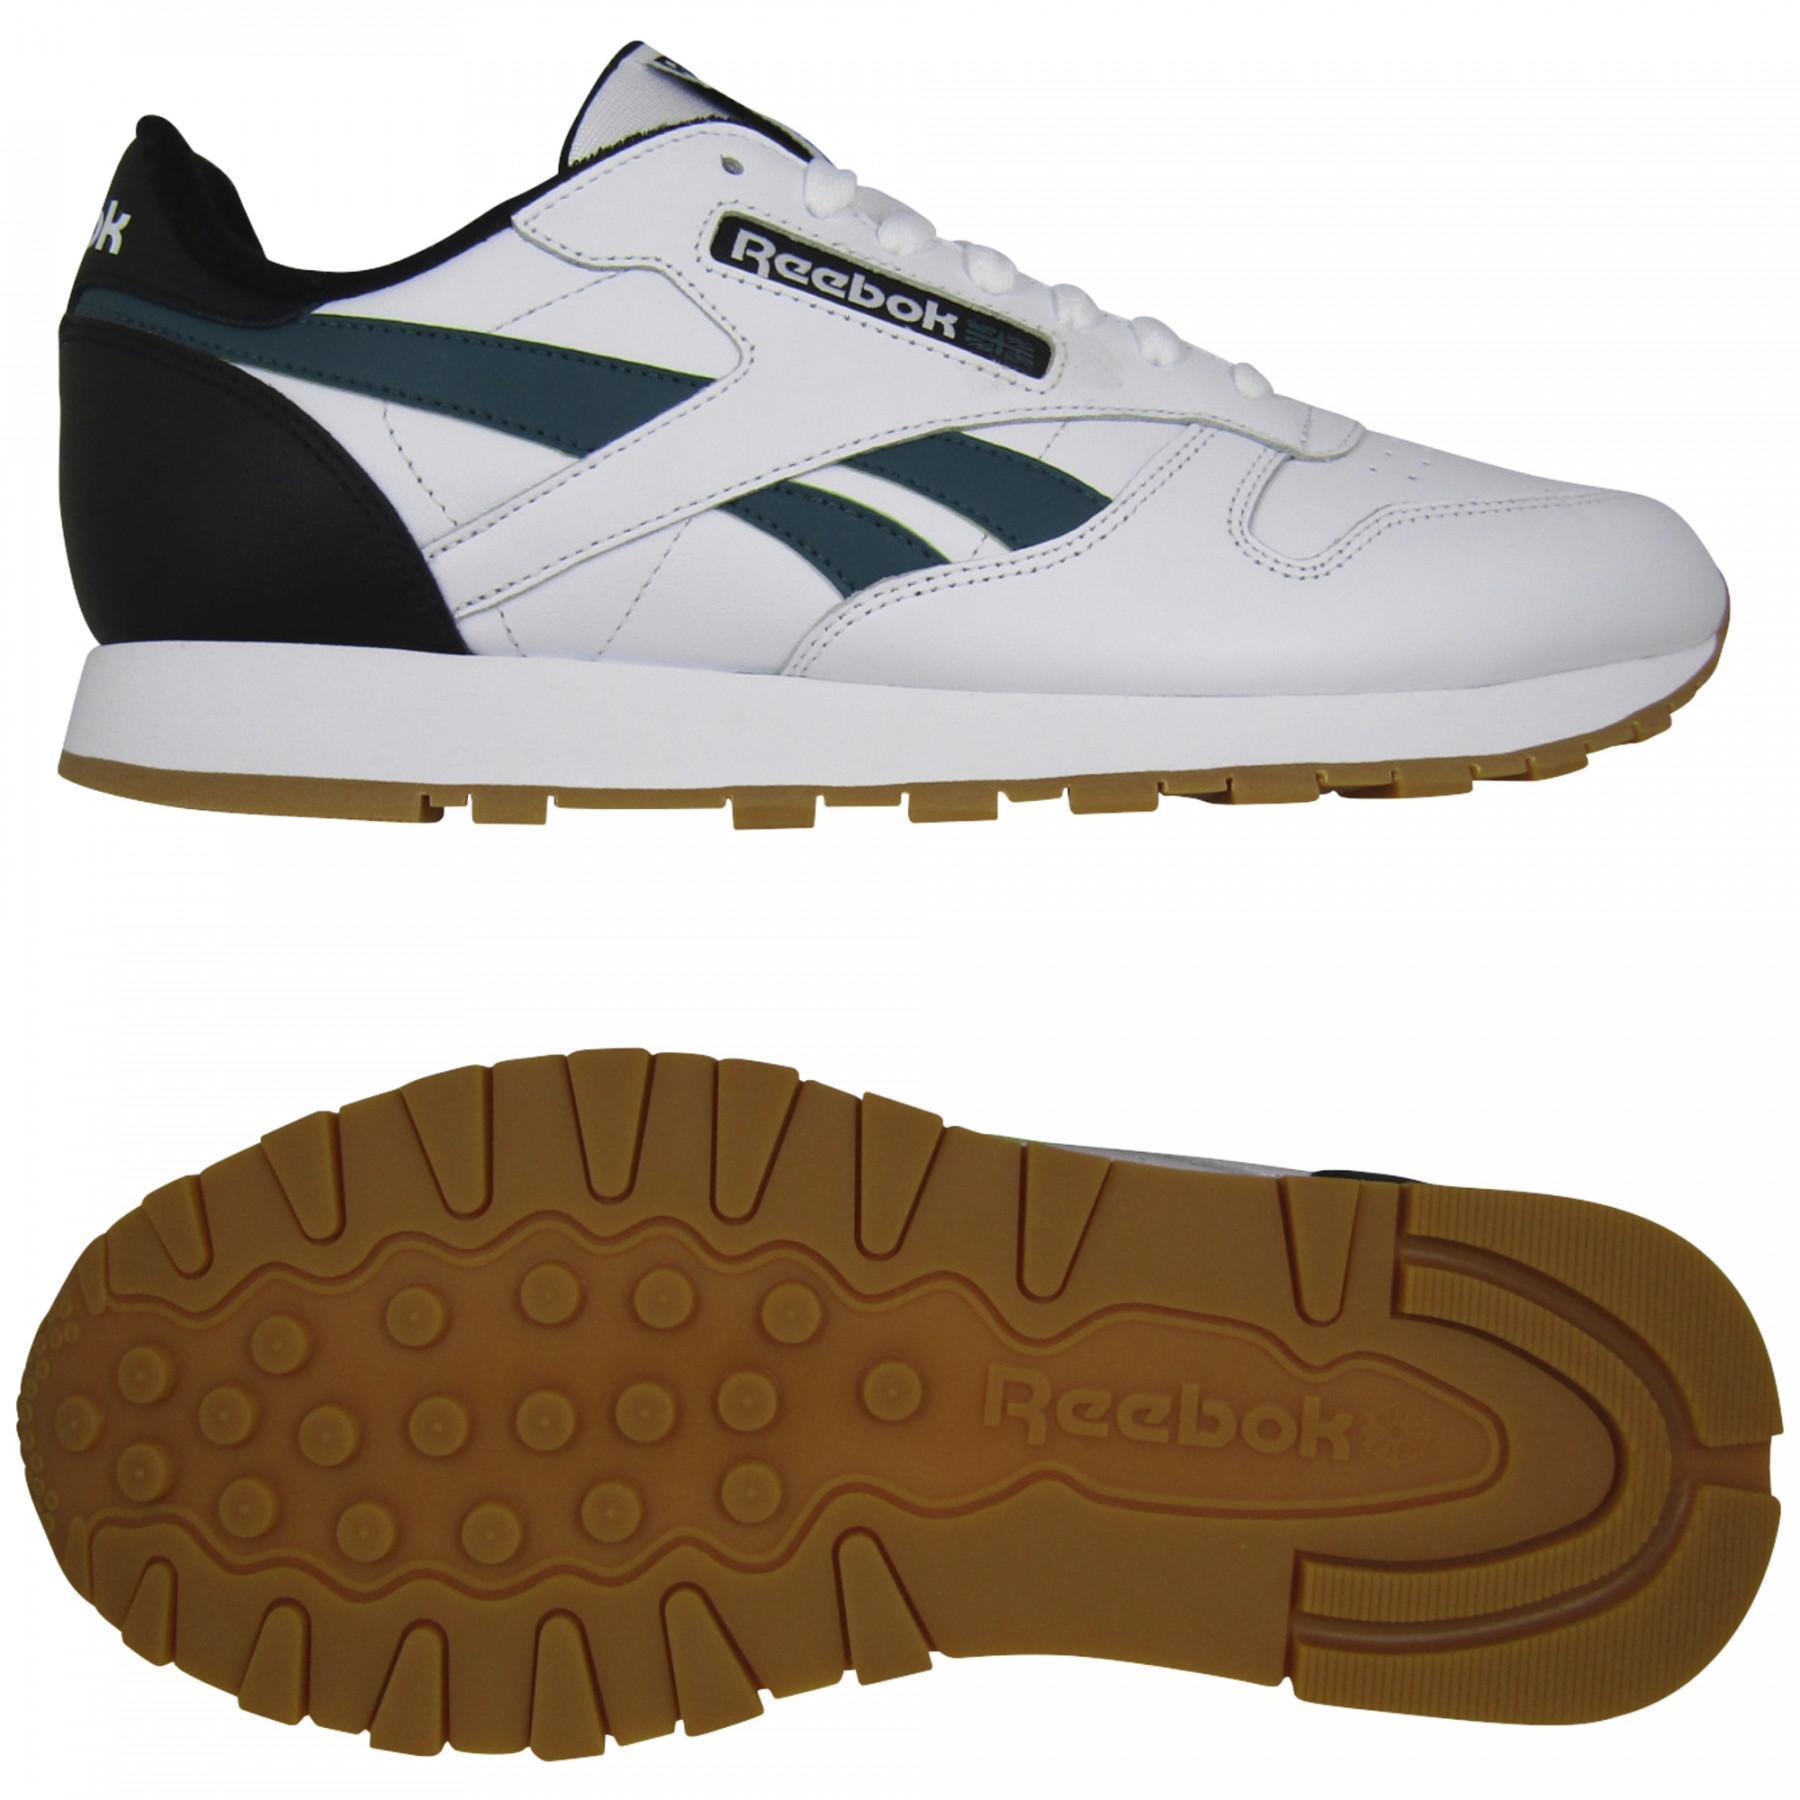 Formadores Reebok CL Leather MU